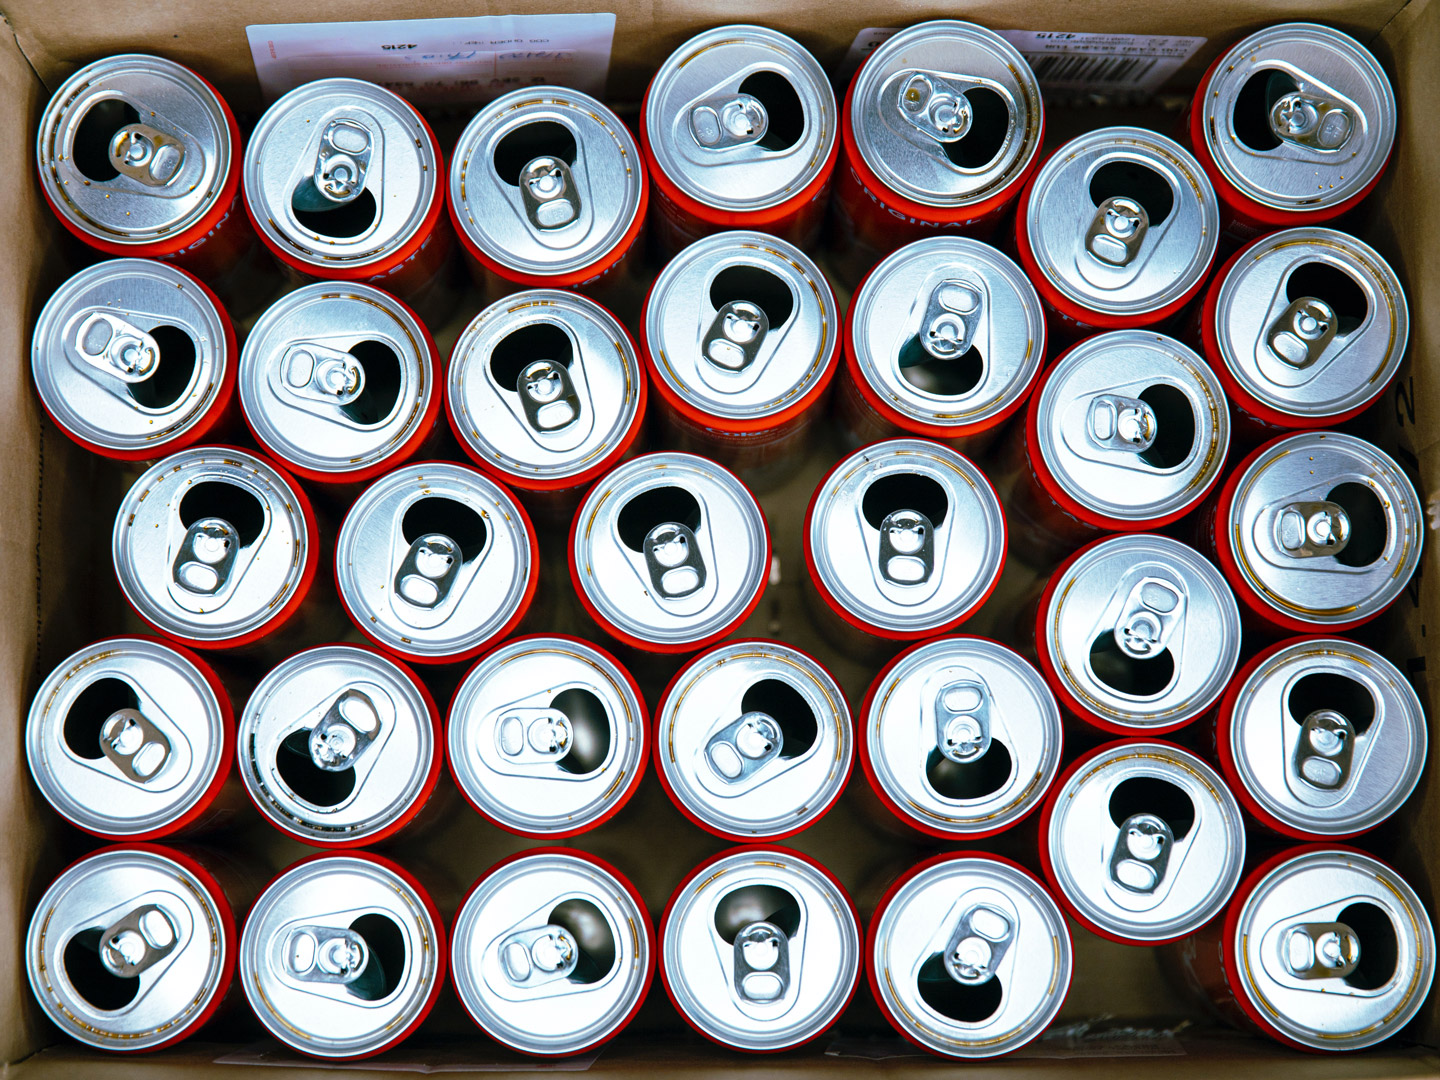 A picture of empty soda cans in a cardboard box.